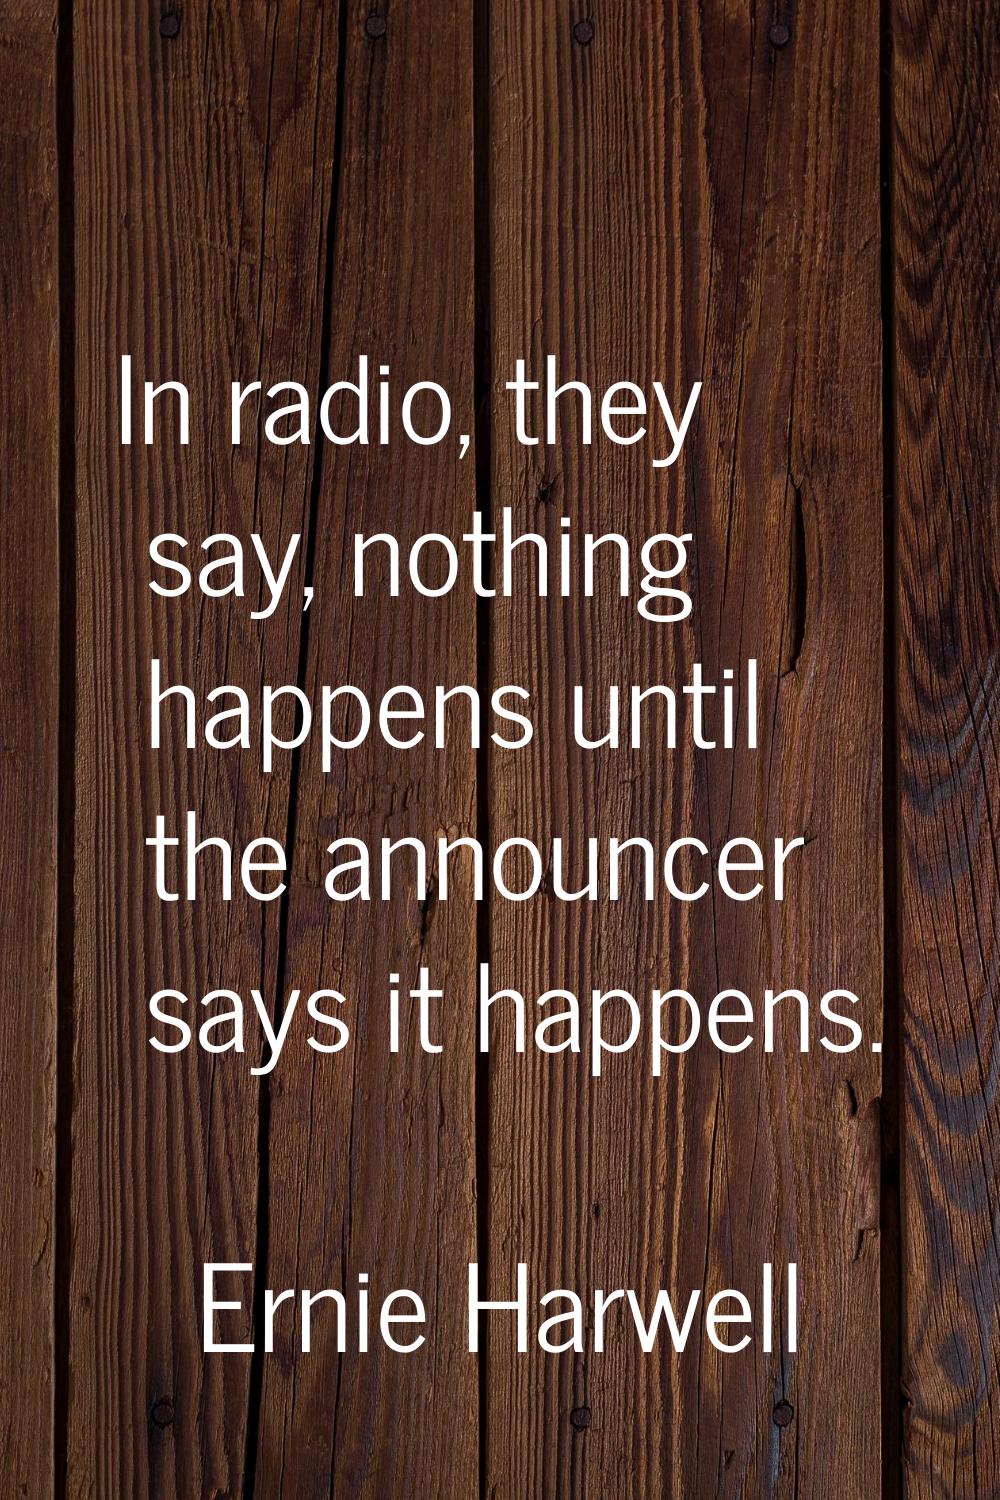 In radio, they say, nothing happens until the announcer says it happens.